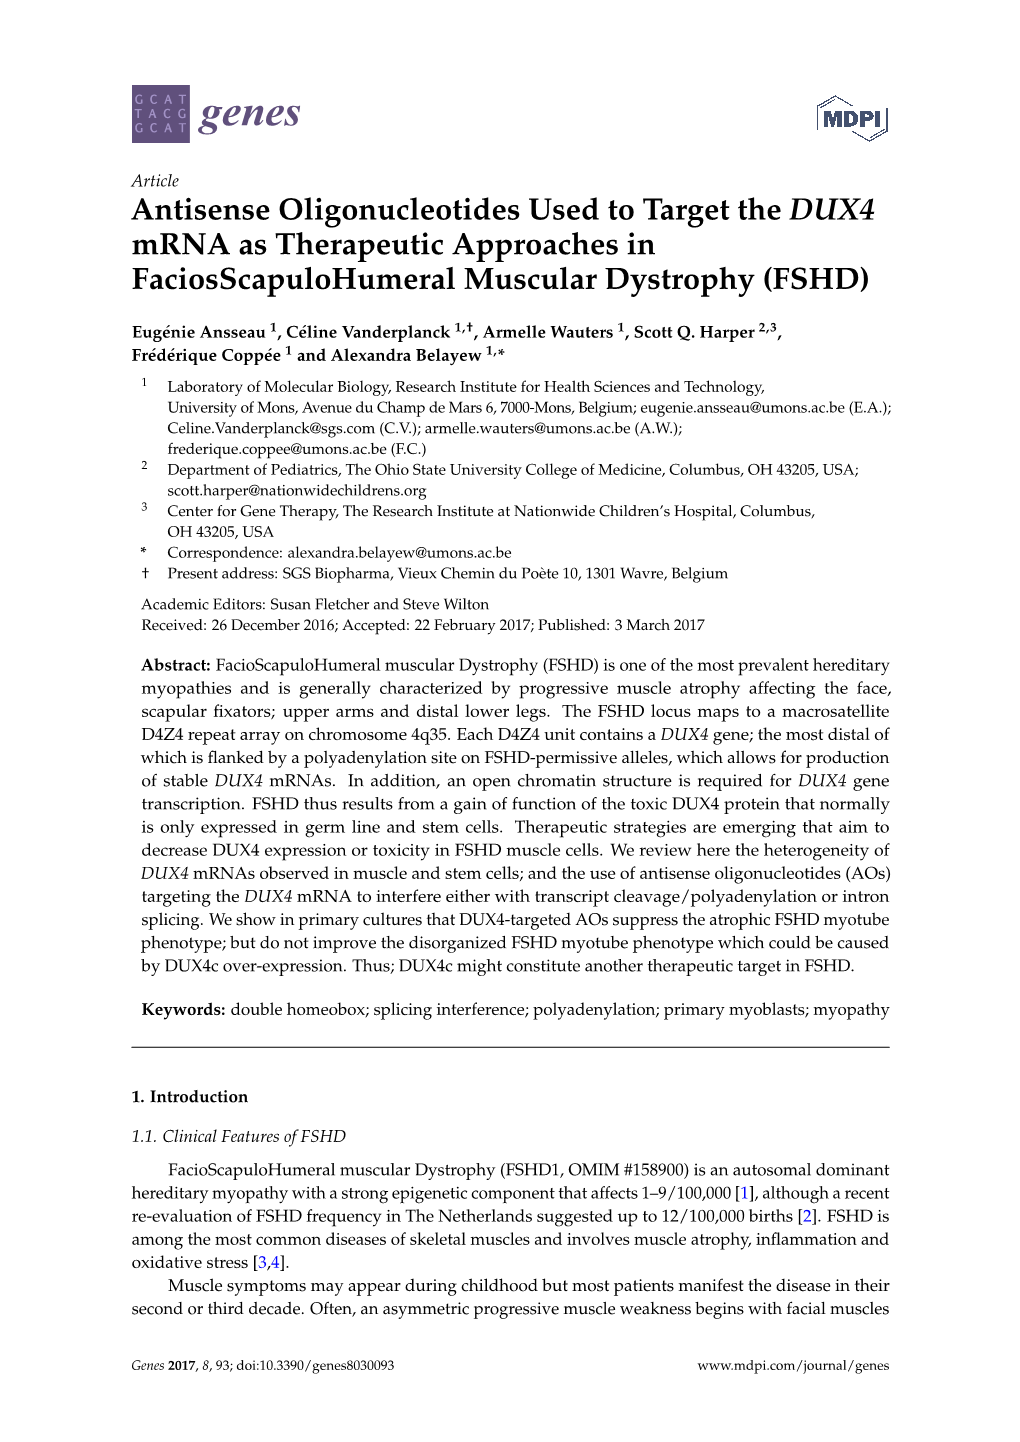 Antisense Oligonucleotides Used to Target the DUX4 Mrna As Therapeutic Approaches in Faciosscapulohumeral Muscular Dystrophy (FSHD)